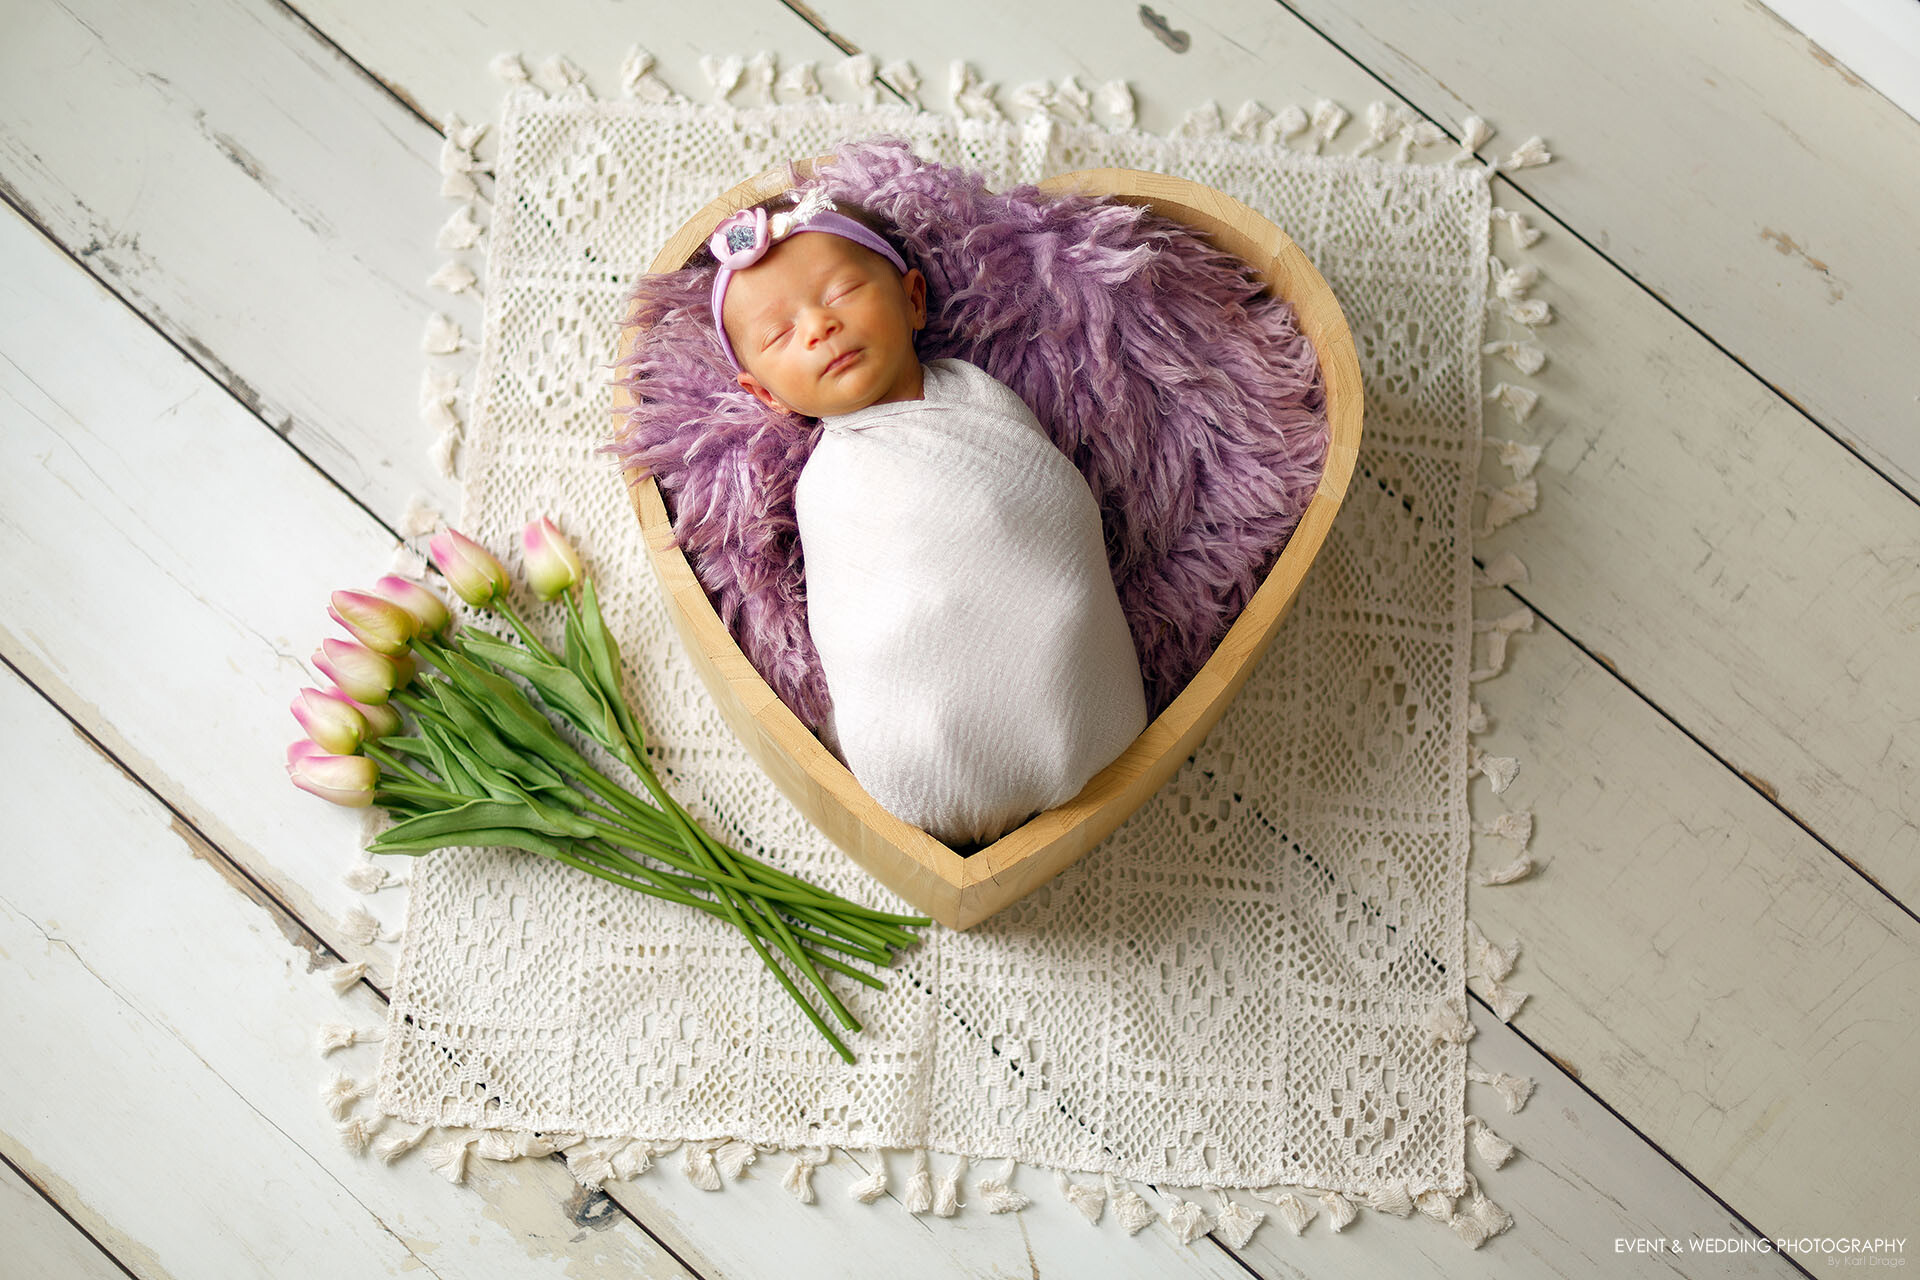 Baby Products Online - Newborn photography props wooden chair  multifunctional furniture for baby photography photo posing tools - Kideno